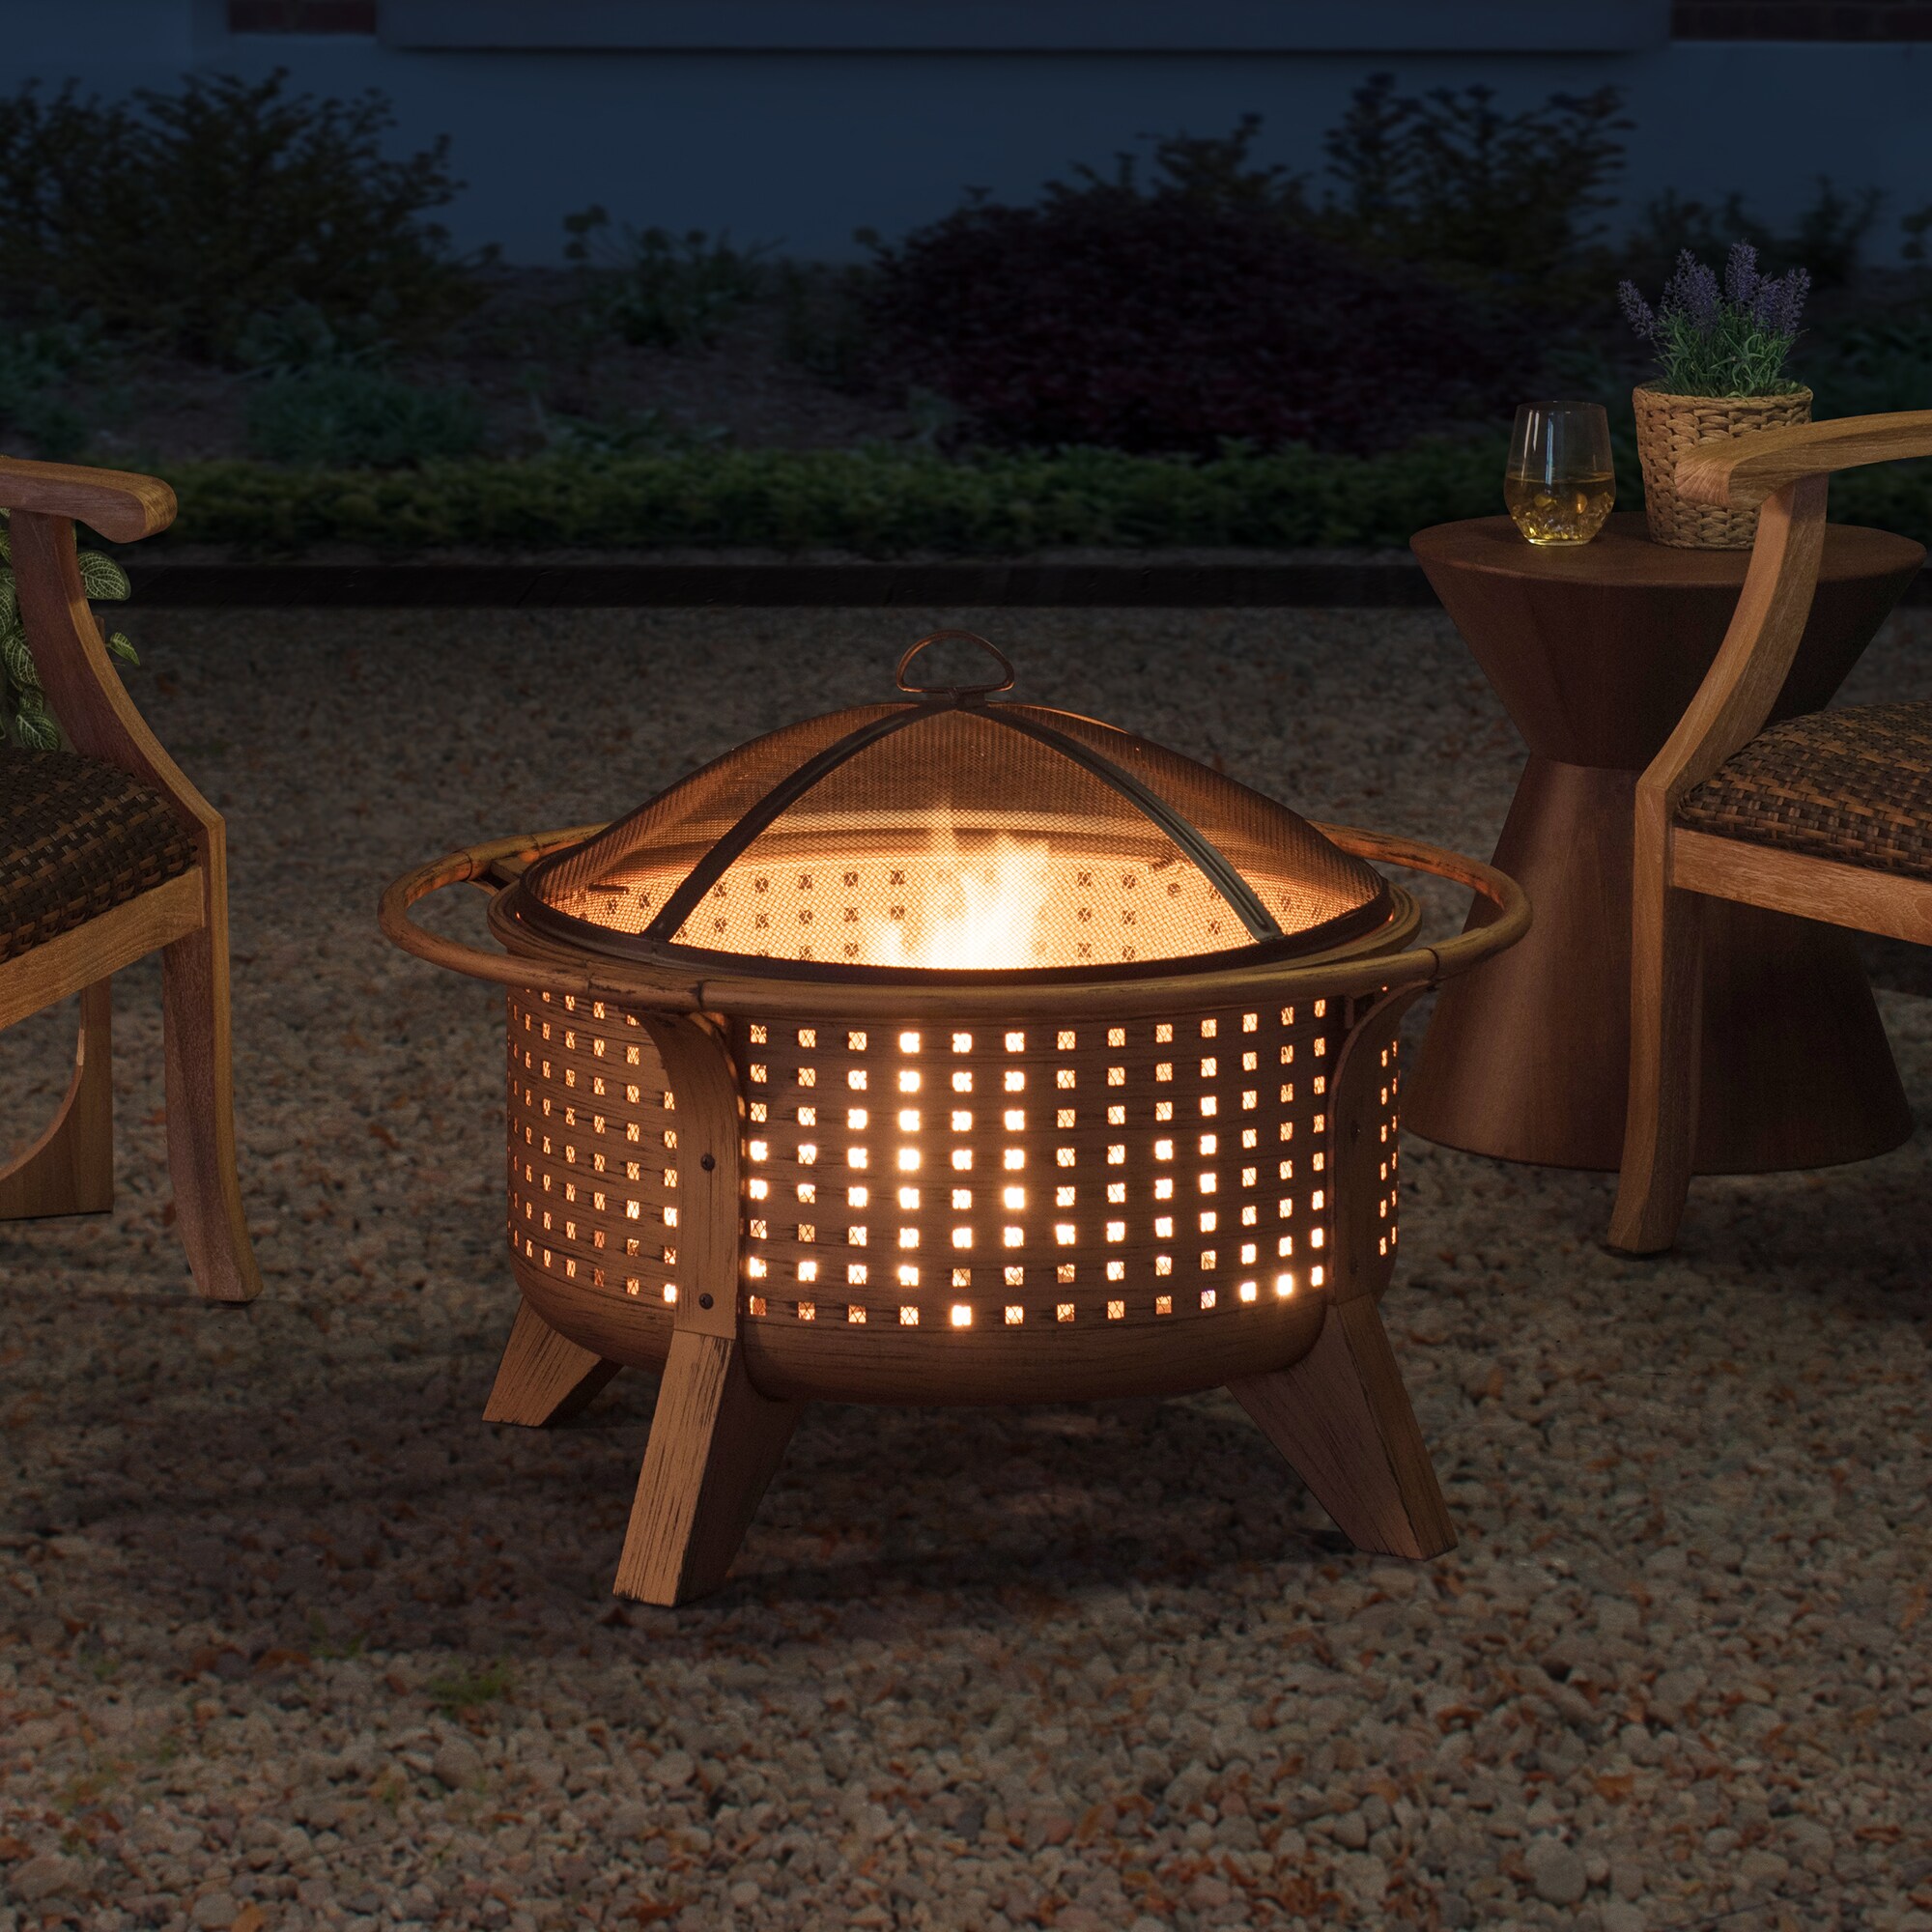 Sunjoy 30-in W Copper/Black Steel Wood-Burning Fire Pit at Lowes.com